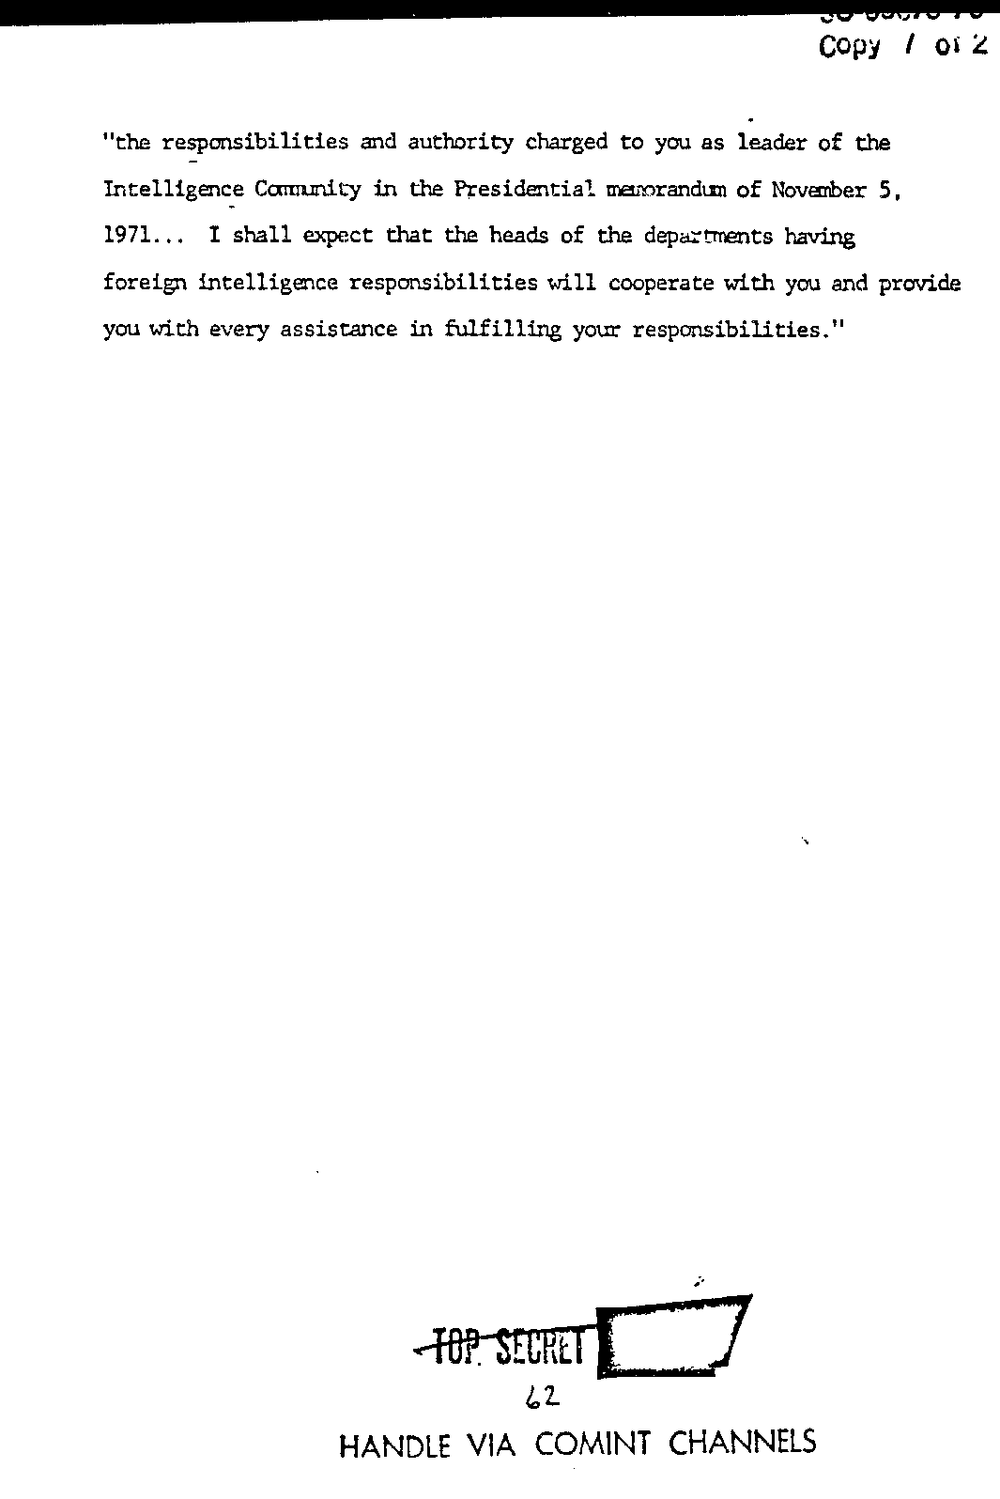 Page 70 from Report on Inquiry Into CIA Related Electronic Surveillance Activities